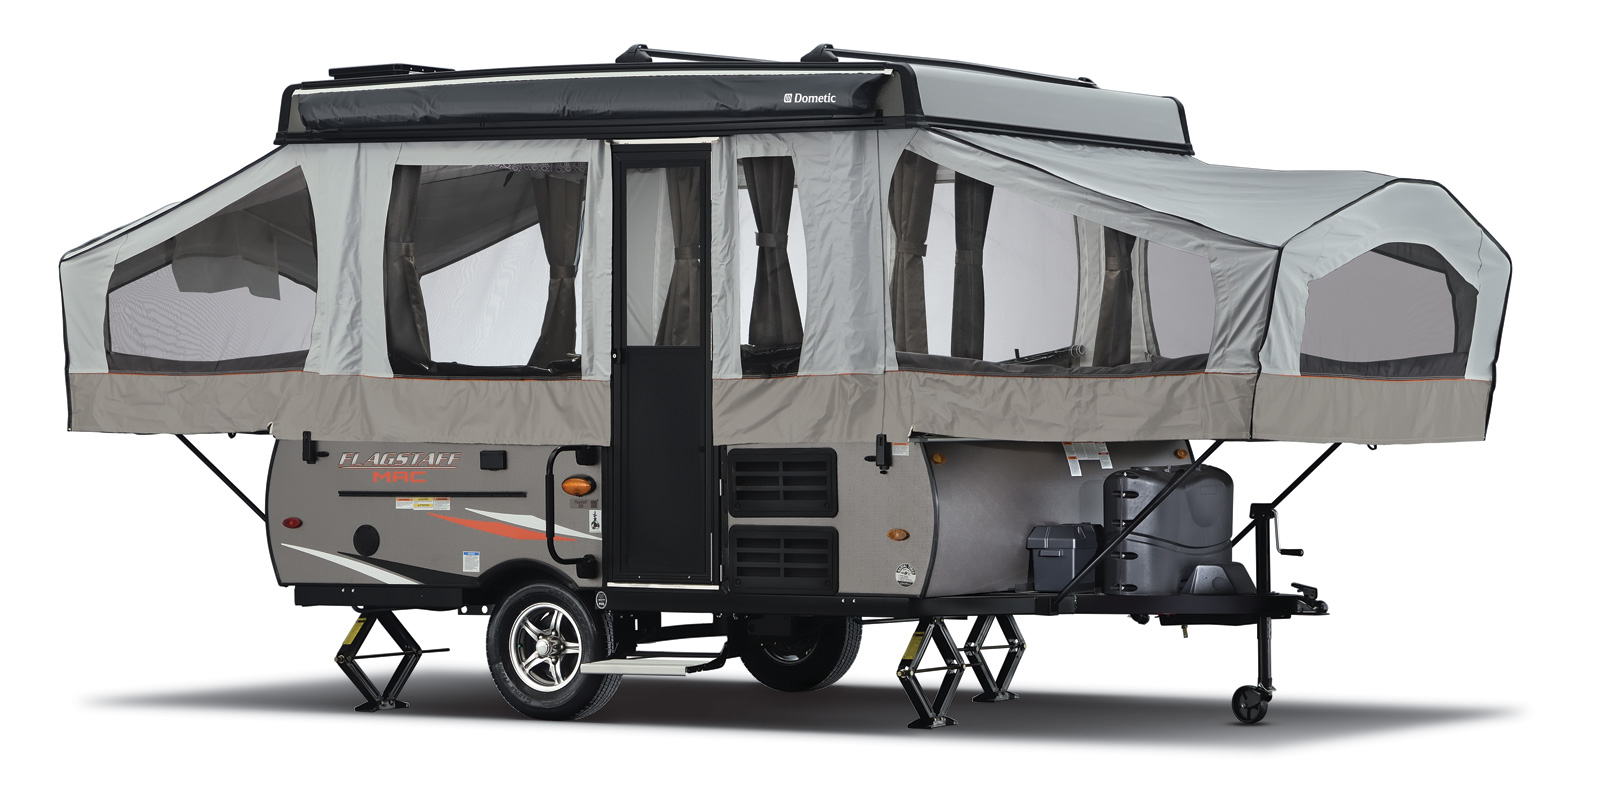 Flagstaff Tent Forest River Rv Manufacturer Of Travel Trailers Fifth Wheels Tent Campers Motorhomes